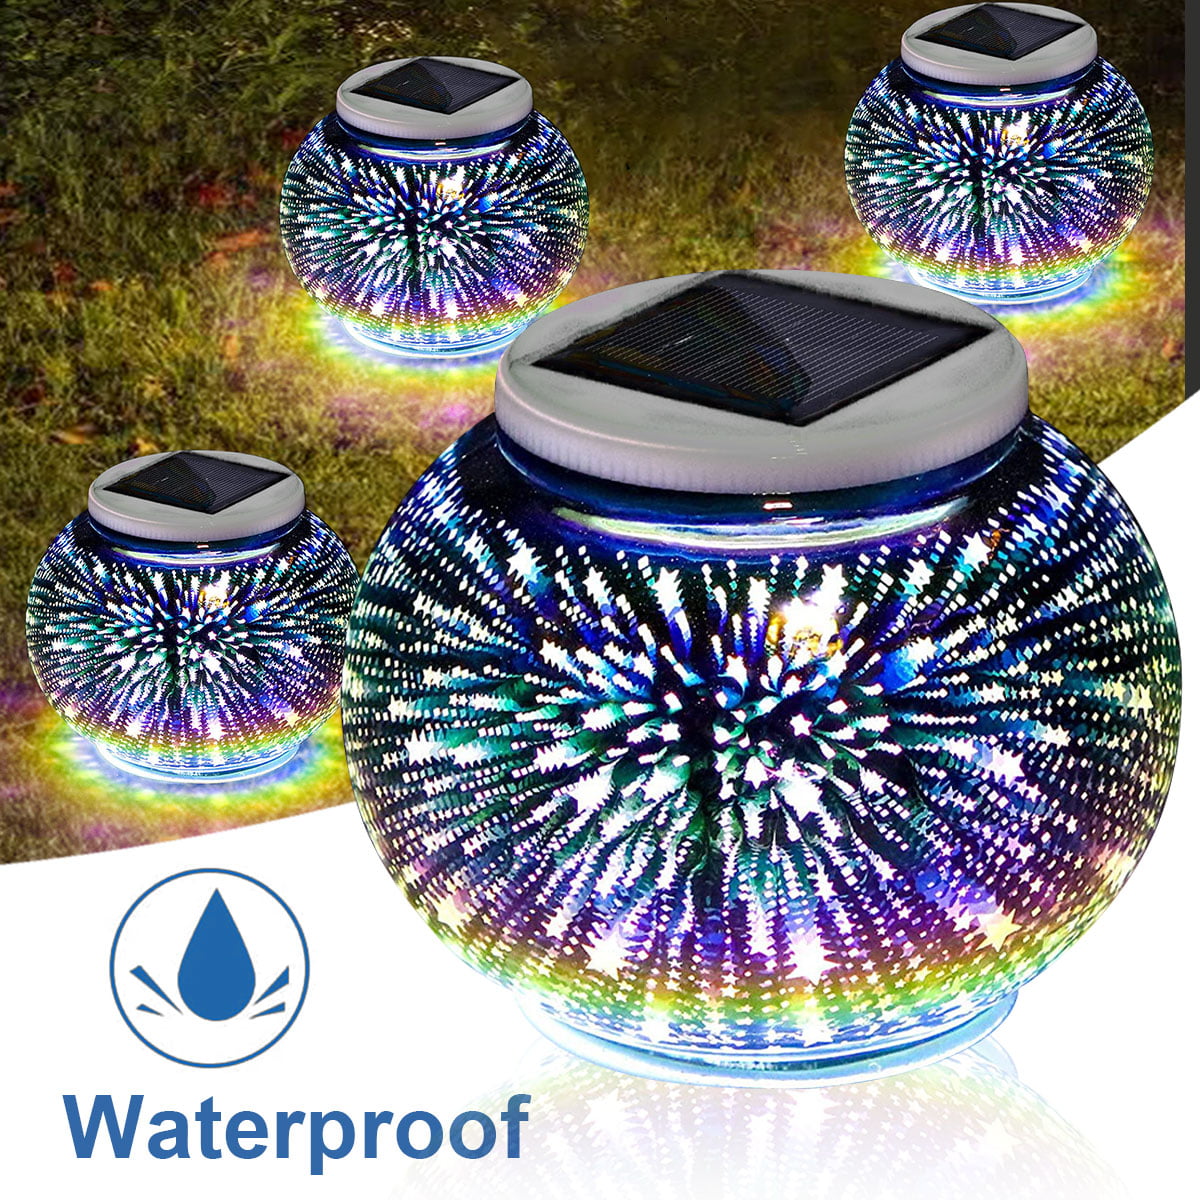 Waterproof Table Light LED Color Changing Lampl Solar Powered Star Pattern 